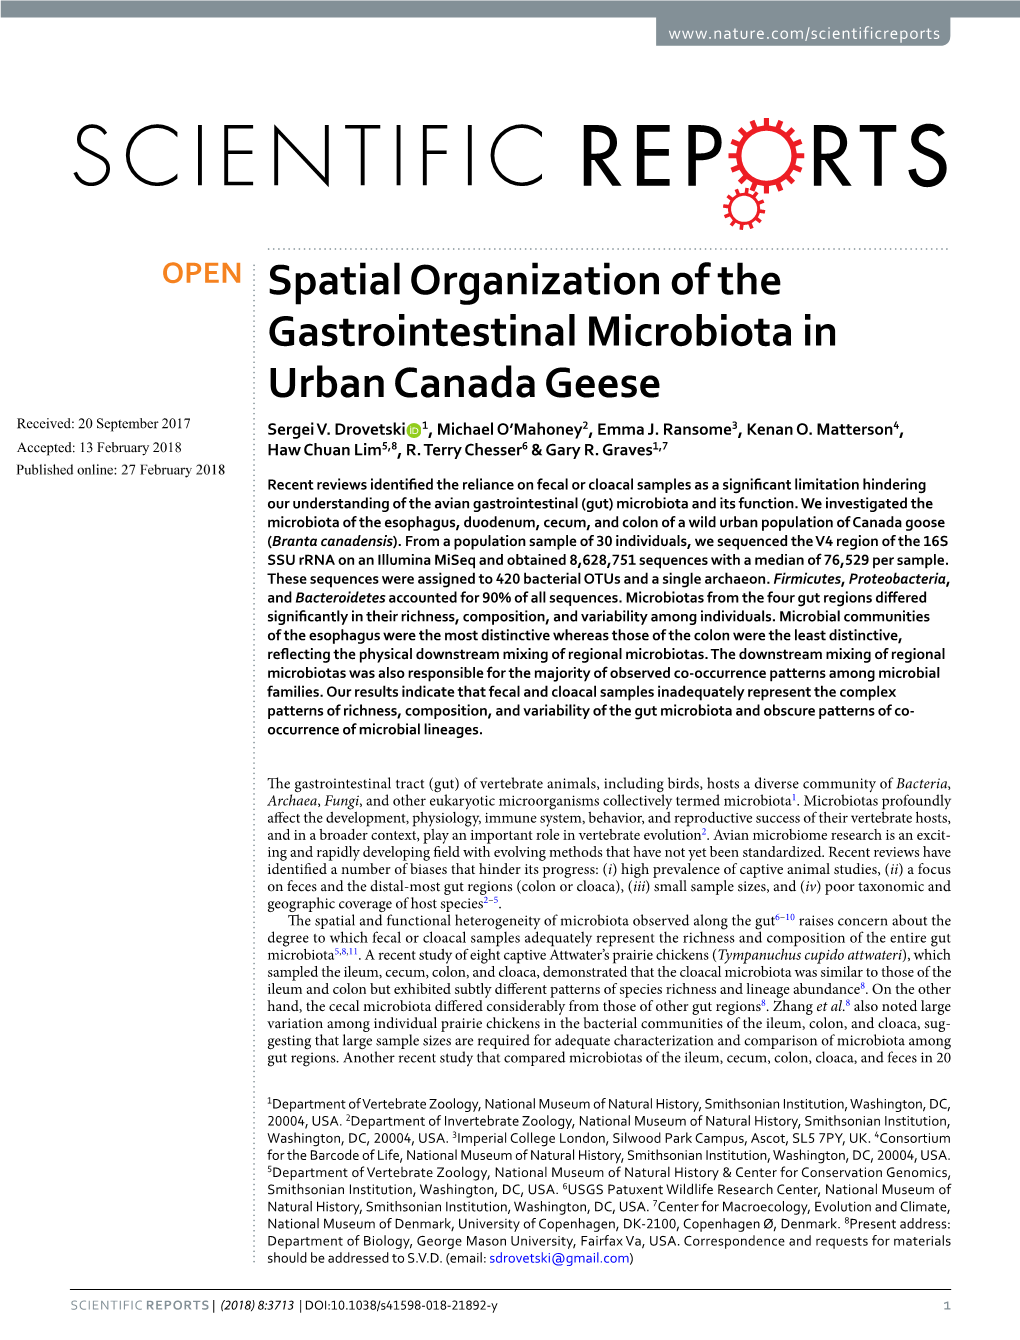 Spatial Organization of the Gastrointestinal Microbiota in Urban Canada Geese Received: 20 September 2017 Sergei V